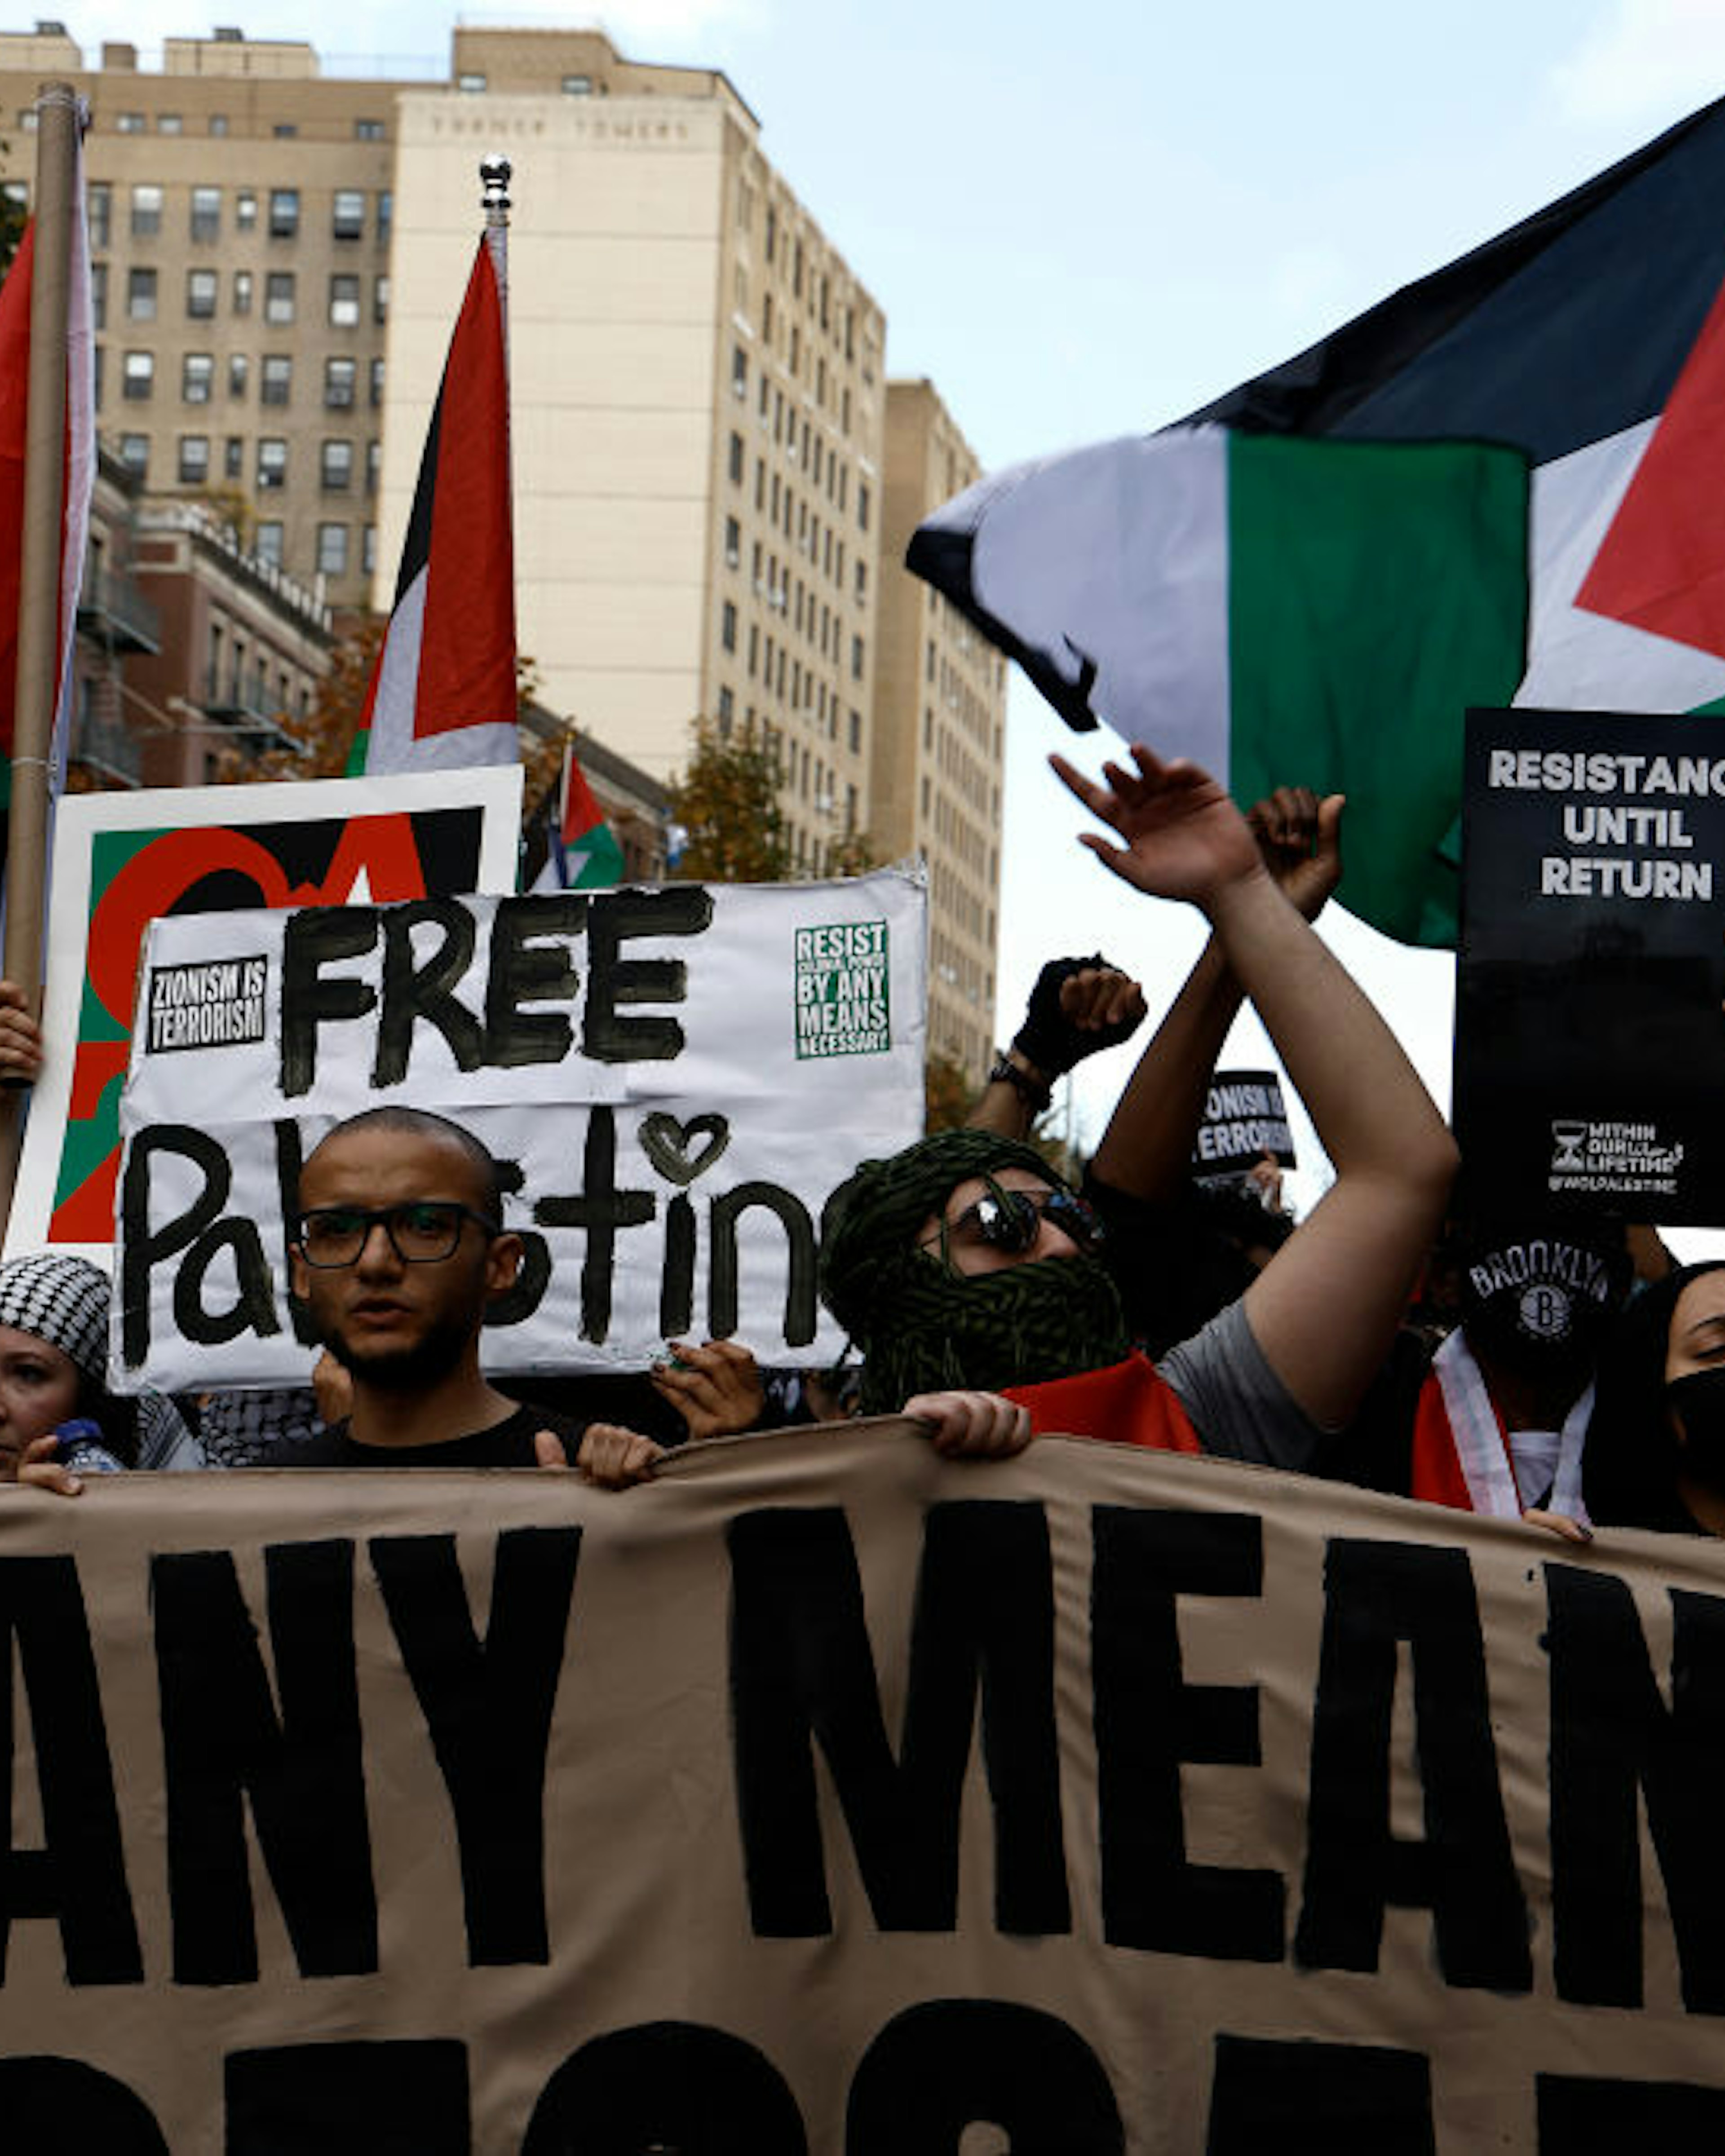 NEW YORK, NEW YORK - OCTOBER 28: Palestinian supporters chant slogans with flags during the “Flood Brooklyn For Gaza” rally as the threat of an Israeli invasion looms near, on October 28, 2023 in the Neighborhood of Crown Heights in Brooklyn a section of New York City. The two groups that organized the rally near the Chabad-Lubavitch Hasidic movement headquarters comes at the heels of demonstrator arrests a week earlier in Bay Ridge Brooklyn. Israeli Defense Forces have increased larger military incursions into Gaza purportedly as a “shaping operation” which sets the stage in preparation for a full scale invasion of Gaza. communications and electricity. (Photo by John Lamparski/Getty Images)